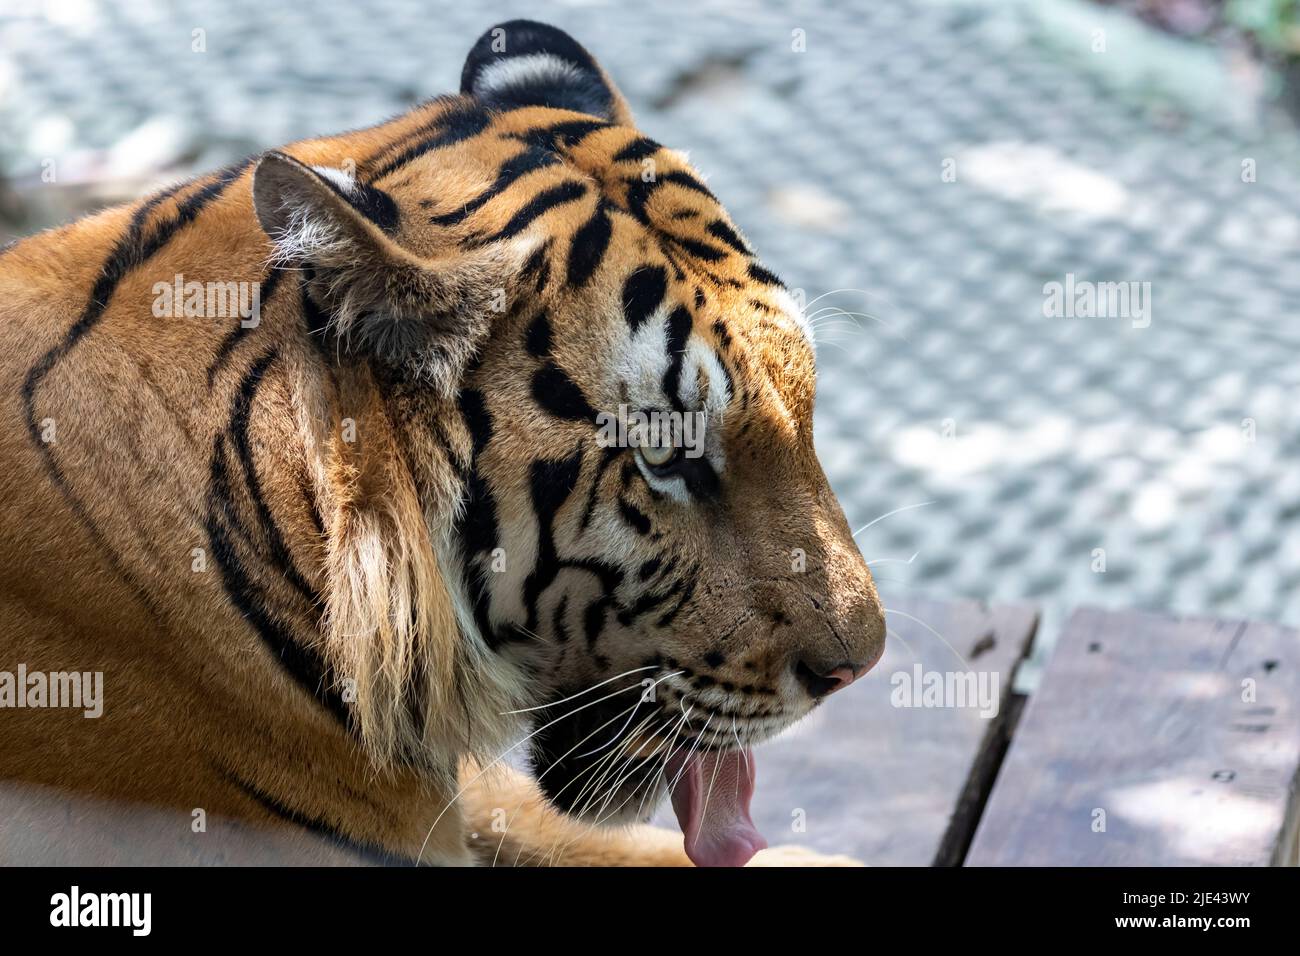 Now, 'Bengal Tiger' heads to Europe